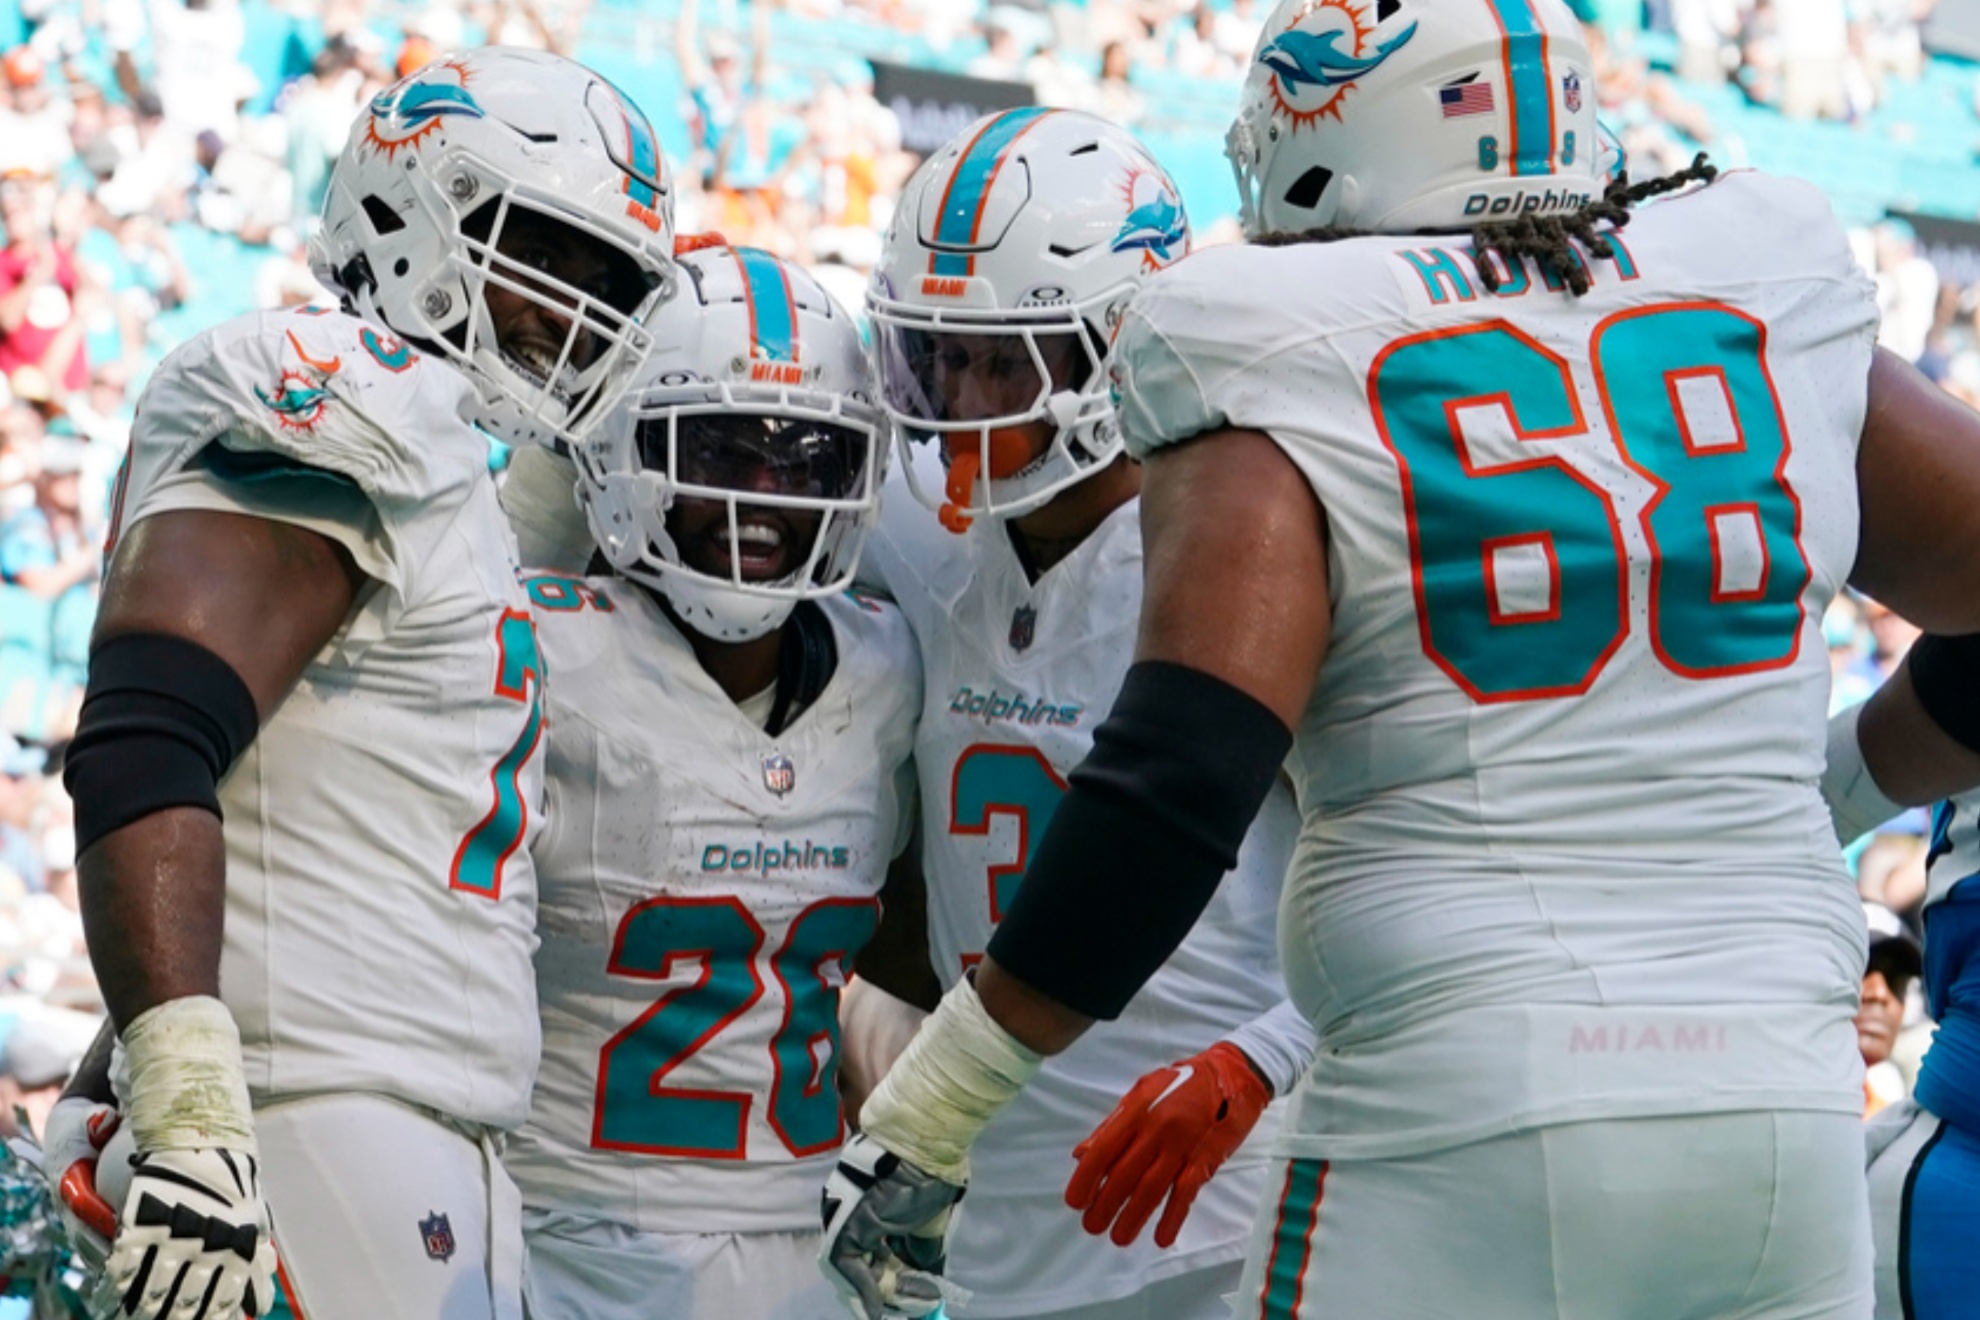 The Miami Dolphins got their second win in a row after beating the Carolina Panthers